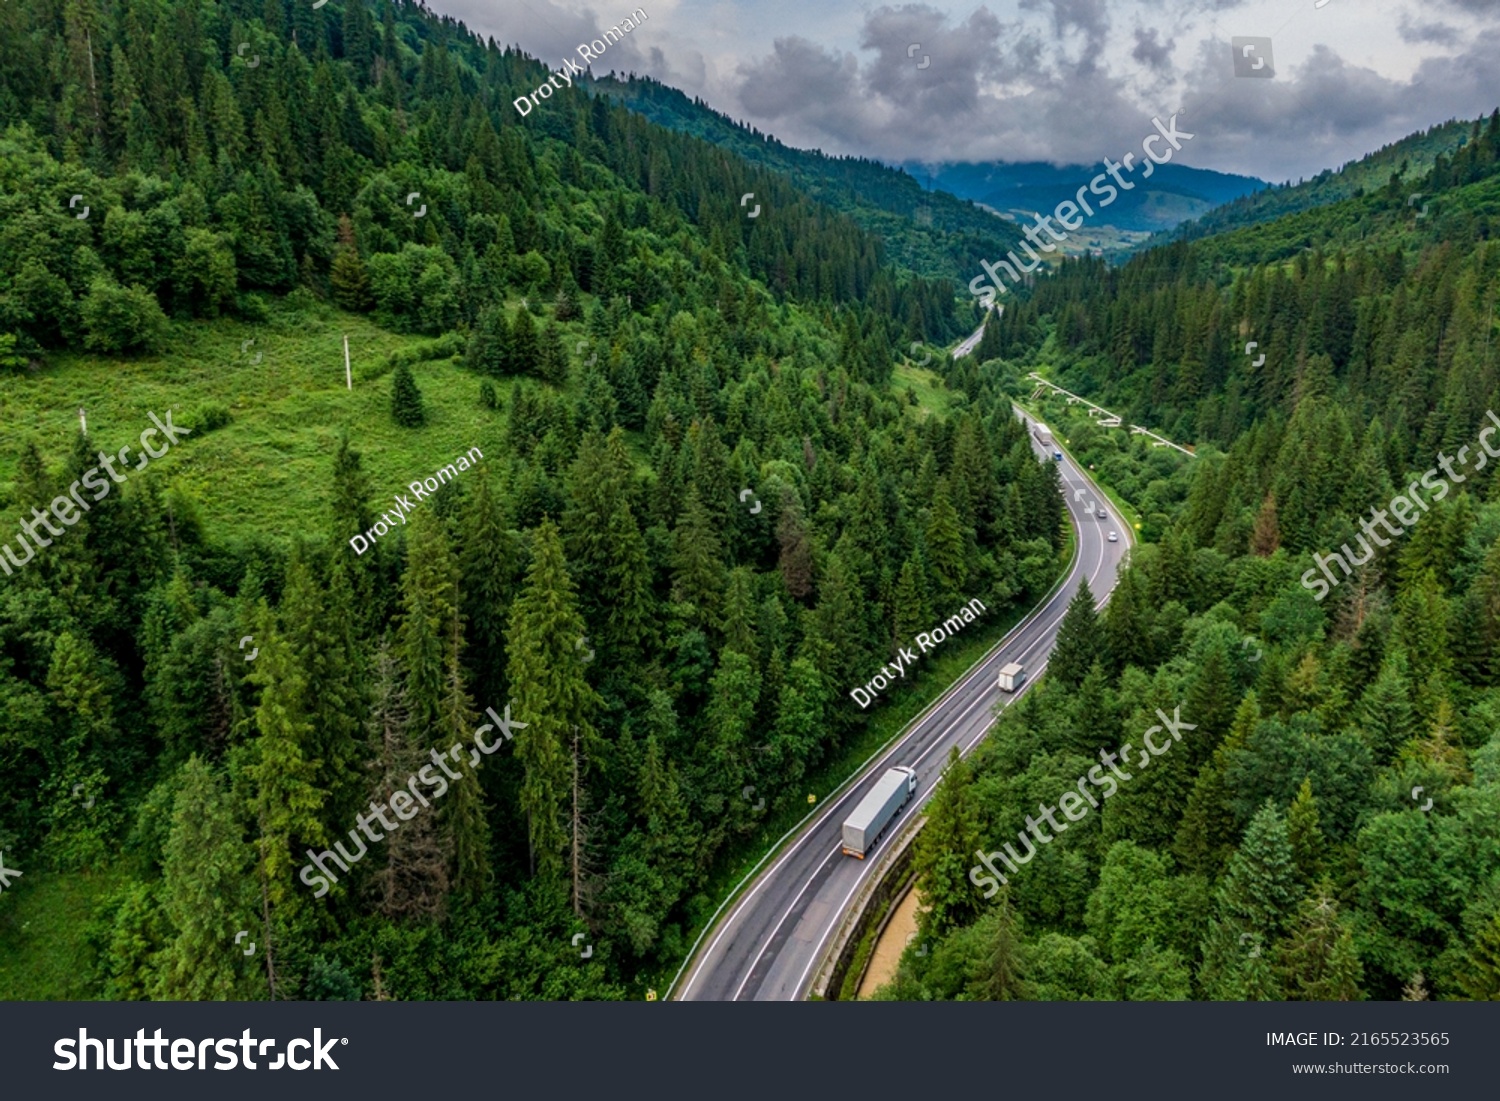 cargo truck on the higthway. cargo delivery driving on asphalt road through the mountains. seen from the air. Aerial view landscape. drone photography.  #2165523565